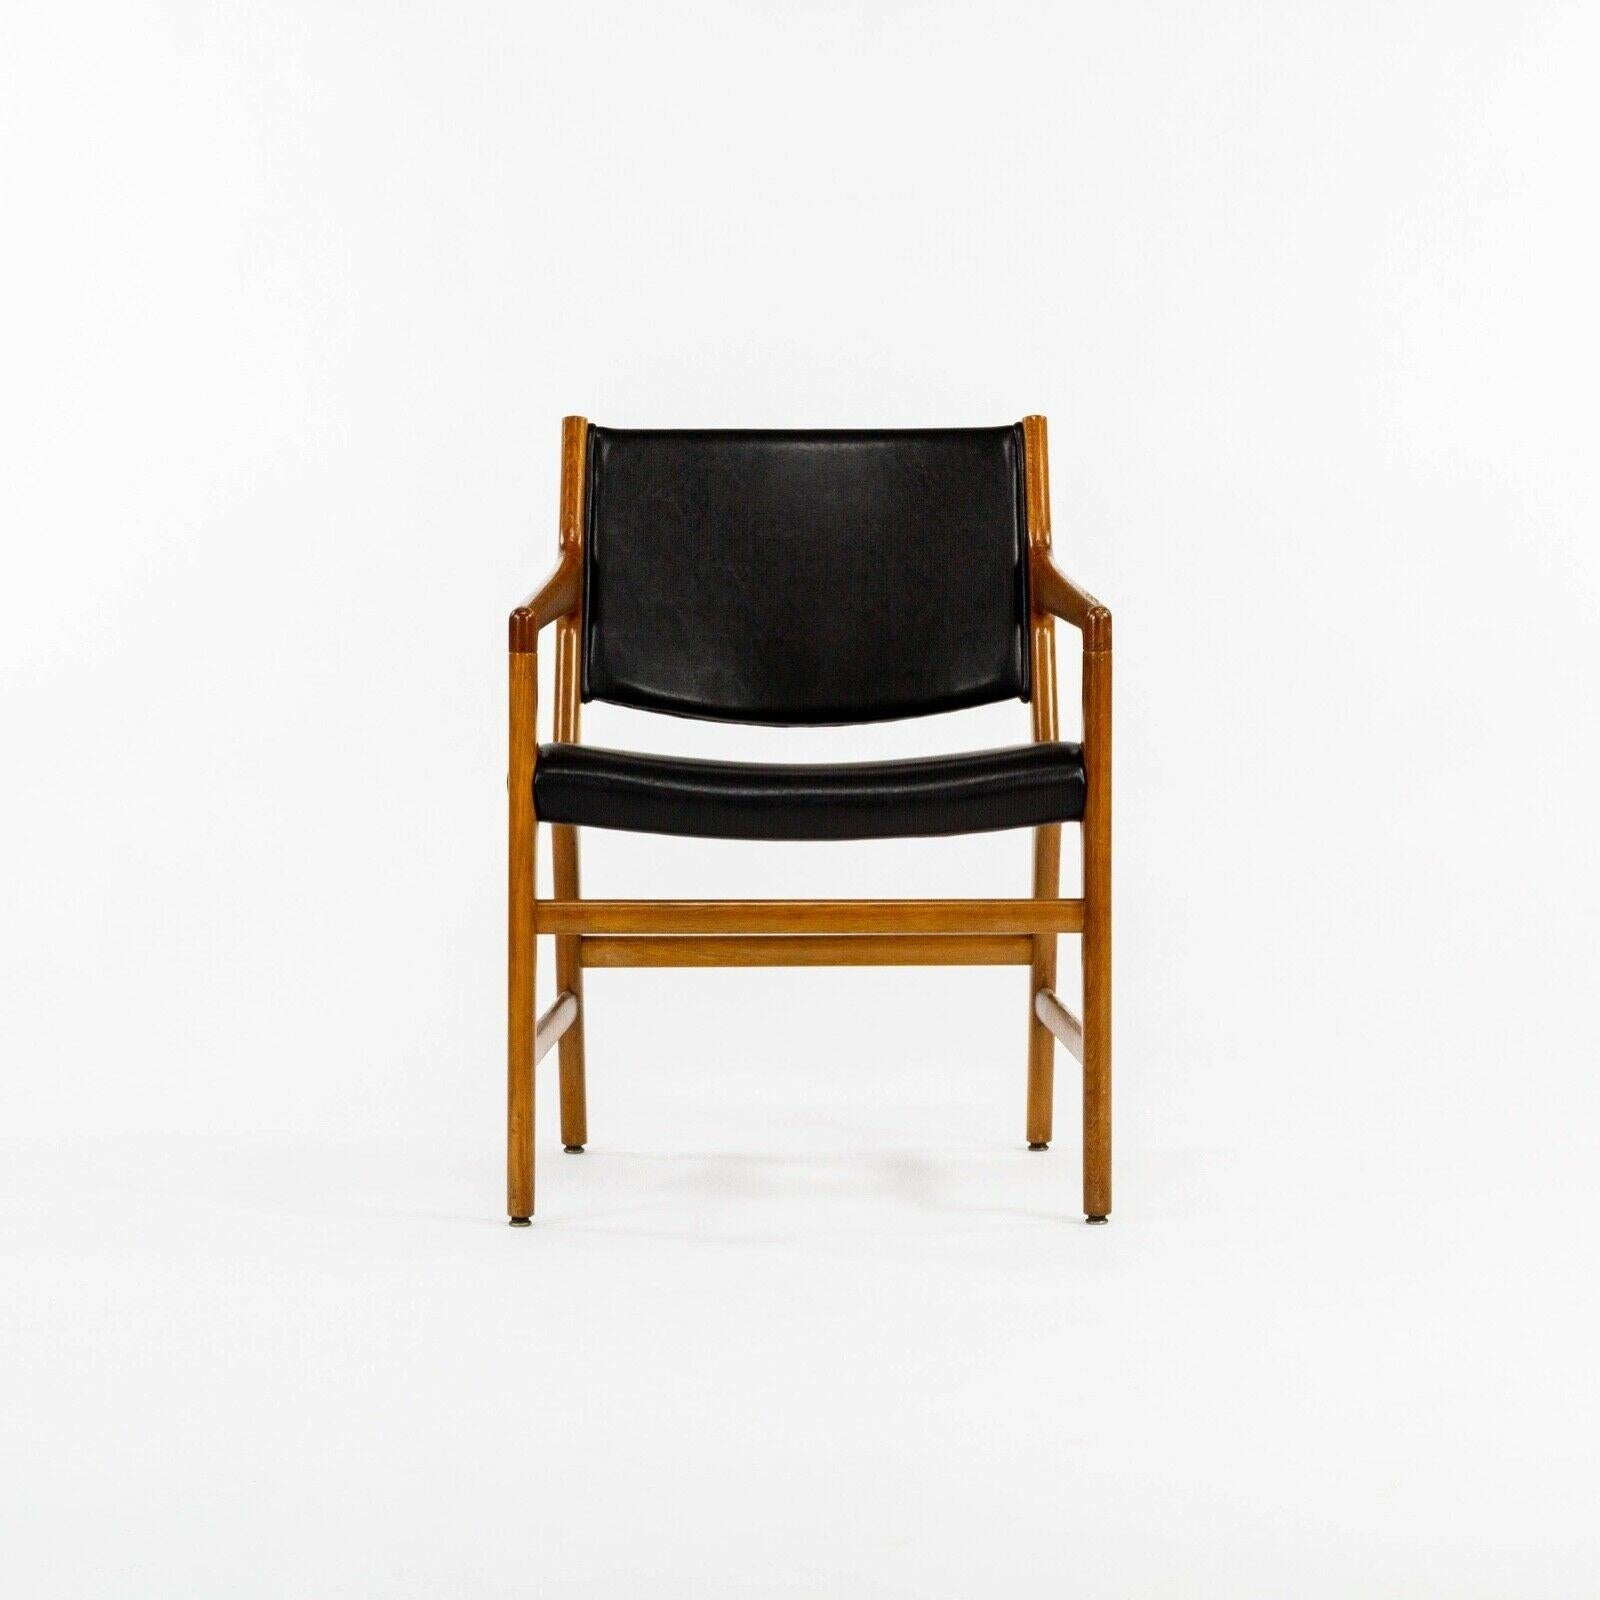 Listed for sale is a single (multiple chairs are available, but the price listed is for each chair) JH 507 dining chair with arms, designed by Hans Wegner, produced by Johannes Hansen. This grouping of chairs came from Harvard University and are